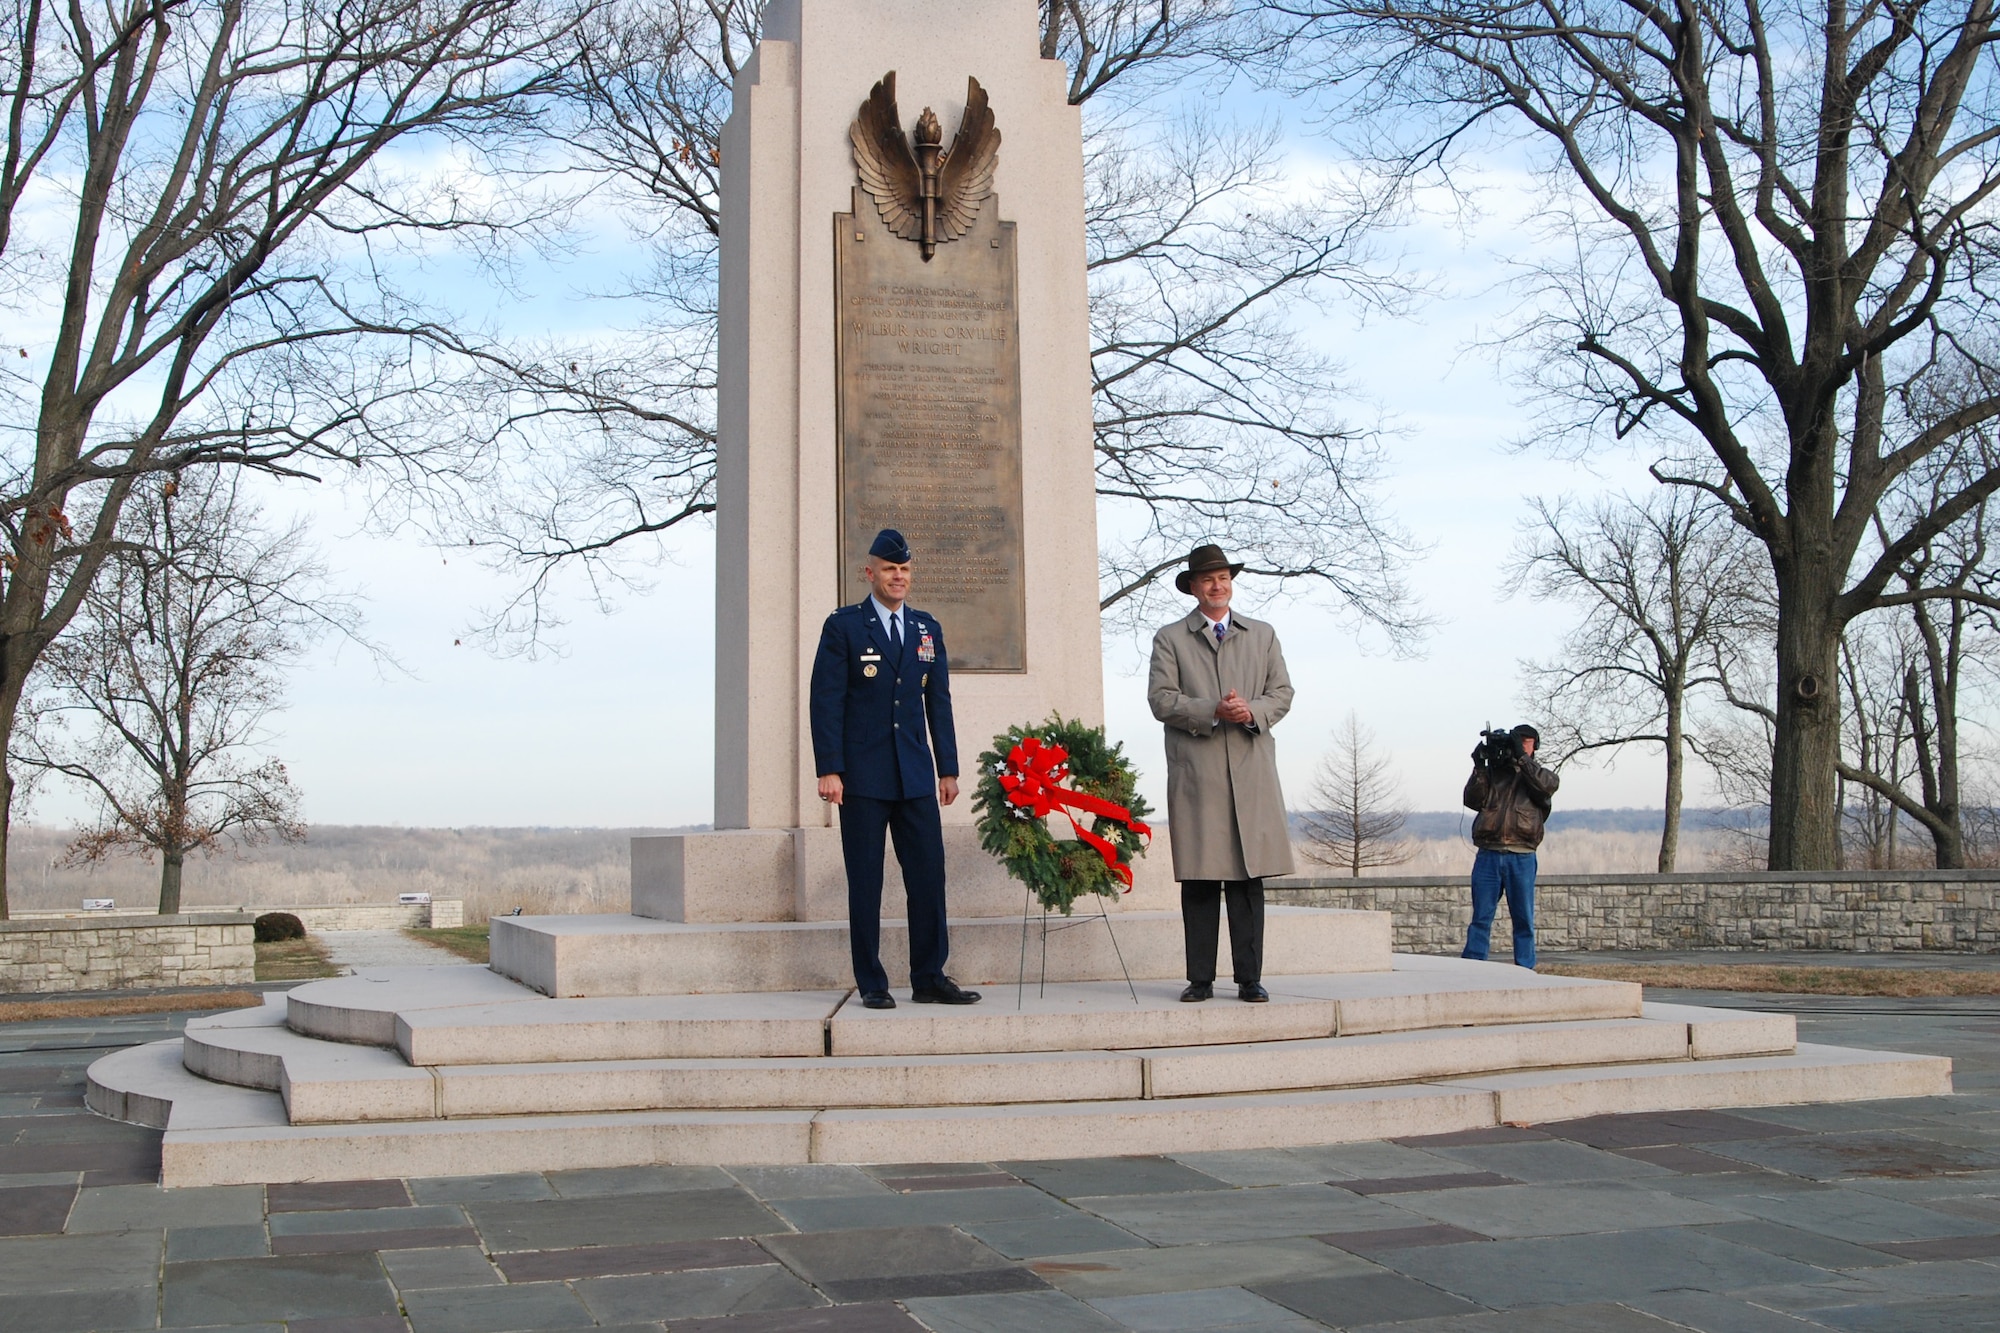 Col. Brad Spacy and Stephen Wright place a wreath at the Wright Brothers Memorial overlooking Wright-Patterson Air Force Base on Dec. 17, 2009 during a ceremony marking the 106th anniversary of the Wright Brothers' first powered flight.  Mr. Wright is the Wright Brothers’ great grand-nephew and Col. Spacy is 88th Air Base Wing commander. (U.S. Air Force photo/Bonnie White)